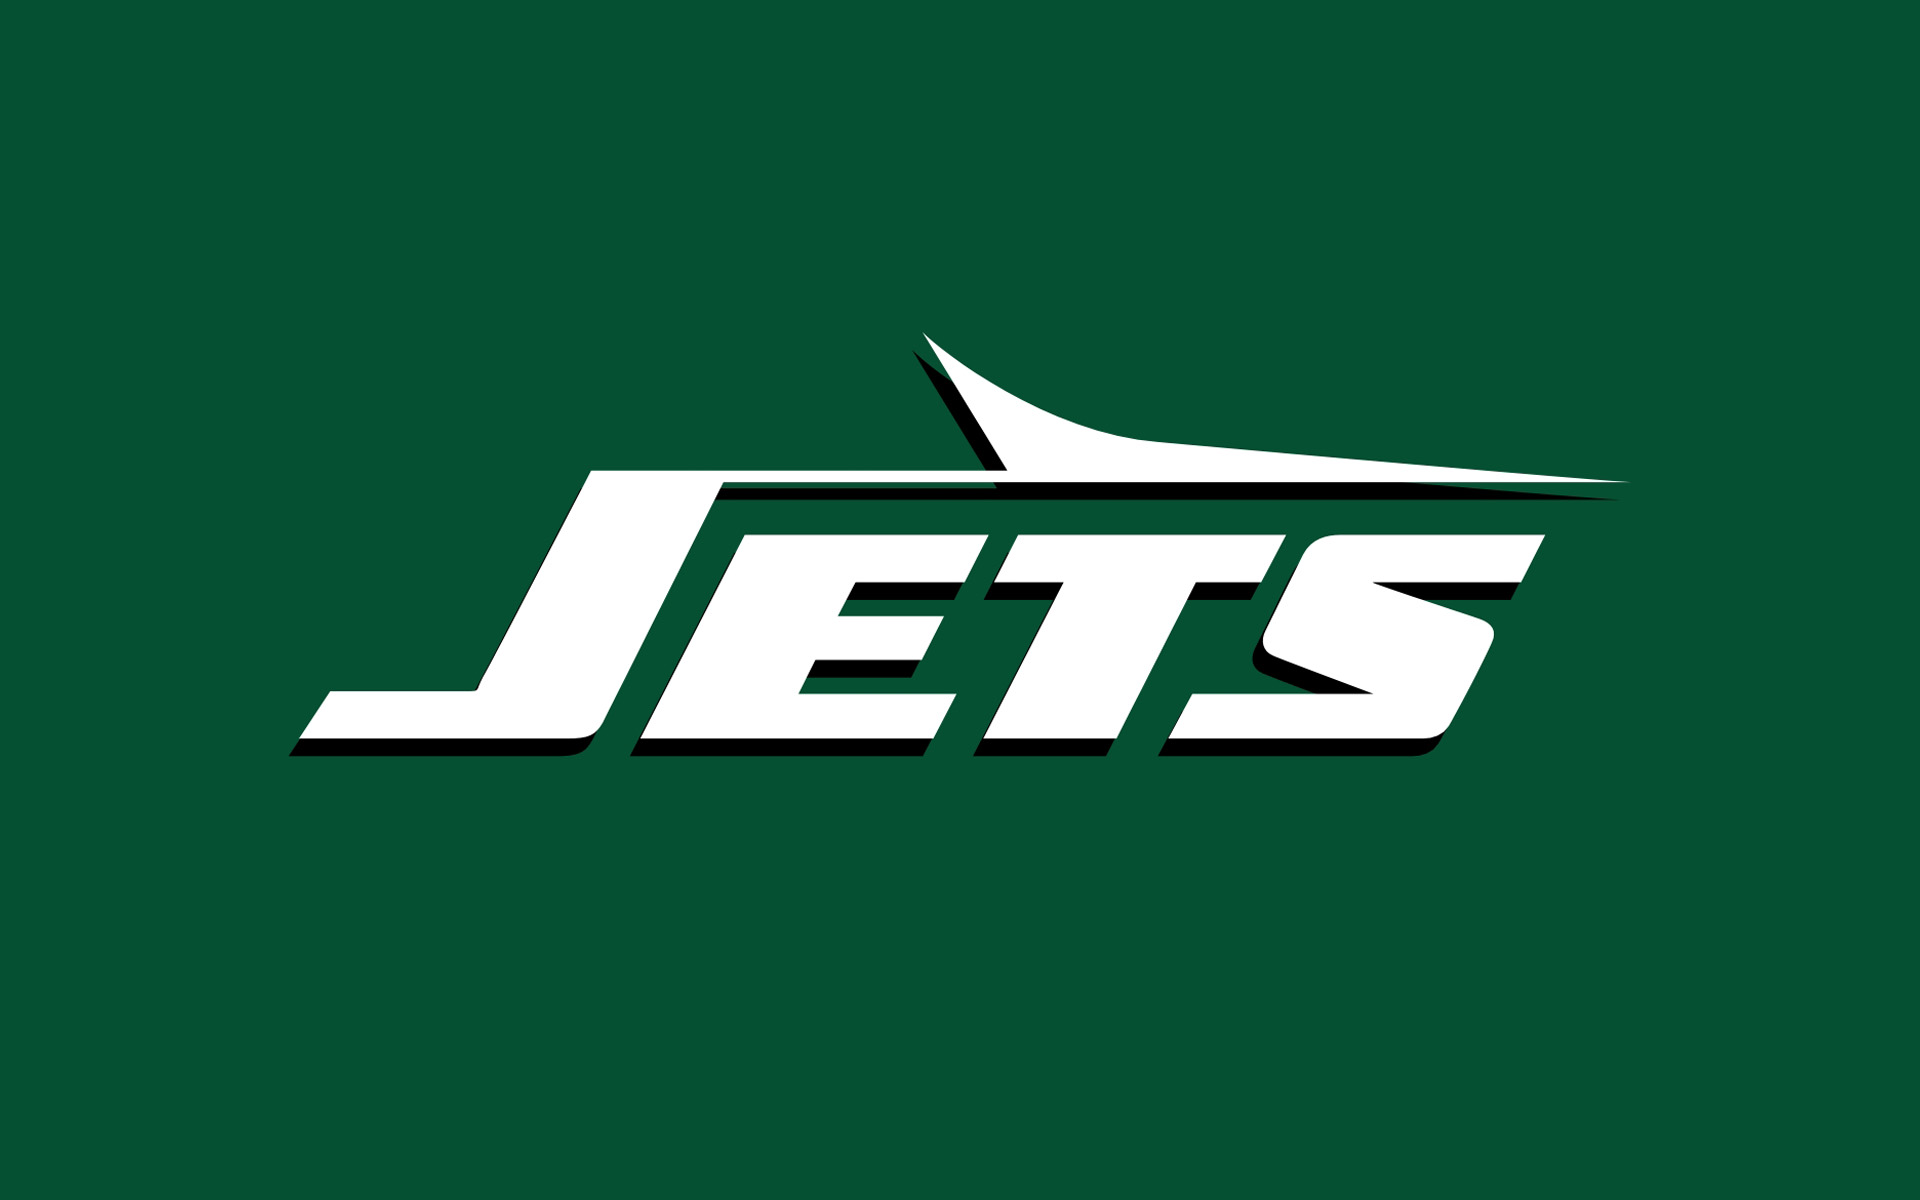  ... Logos Wallpapers (1920 x 1200 pixels) » NEW YORK JETS old 1920×1200